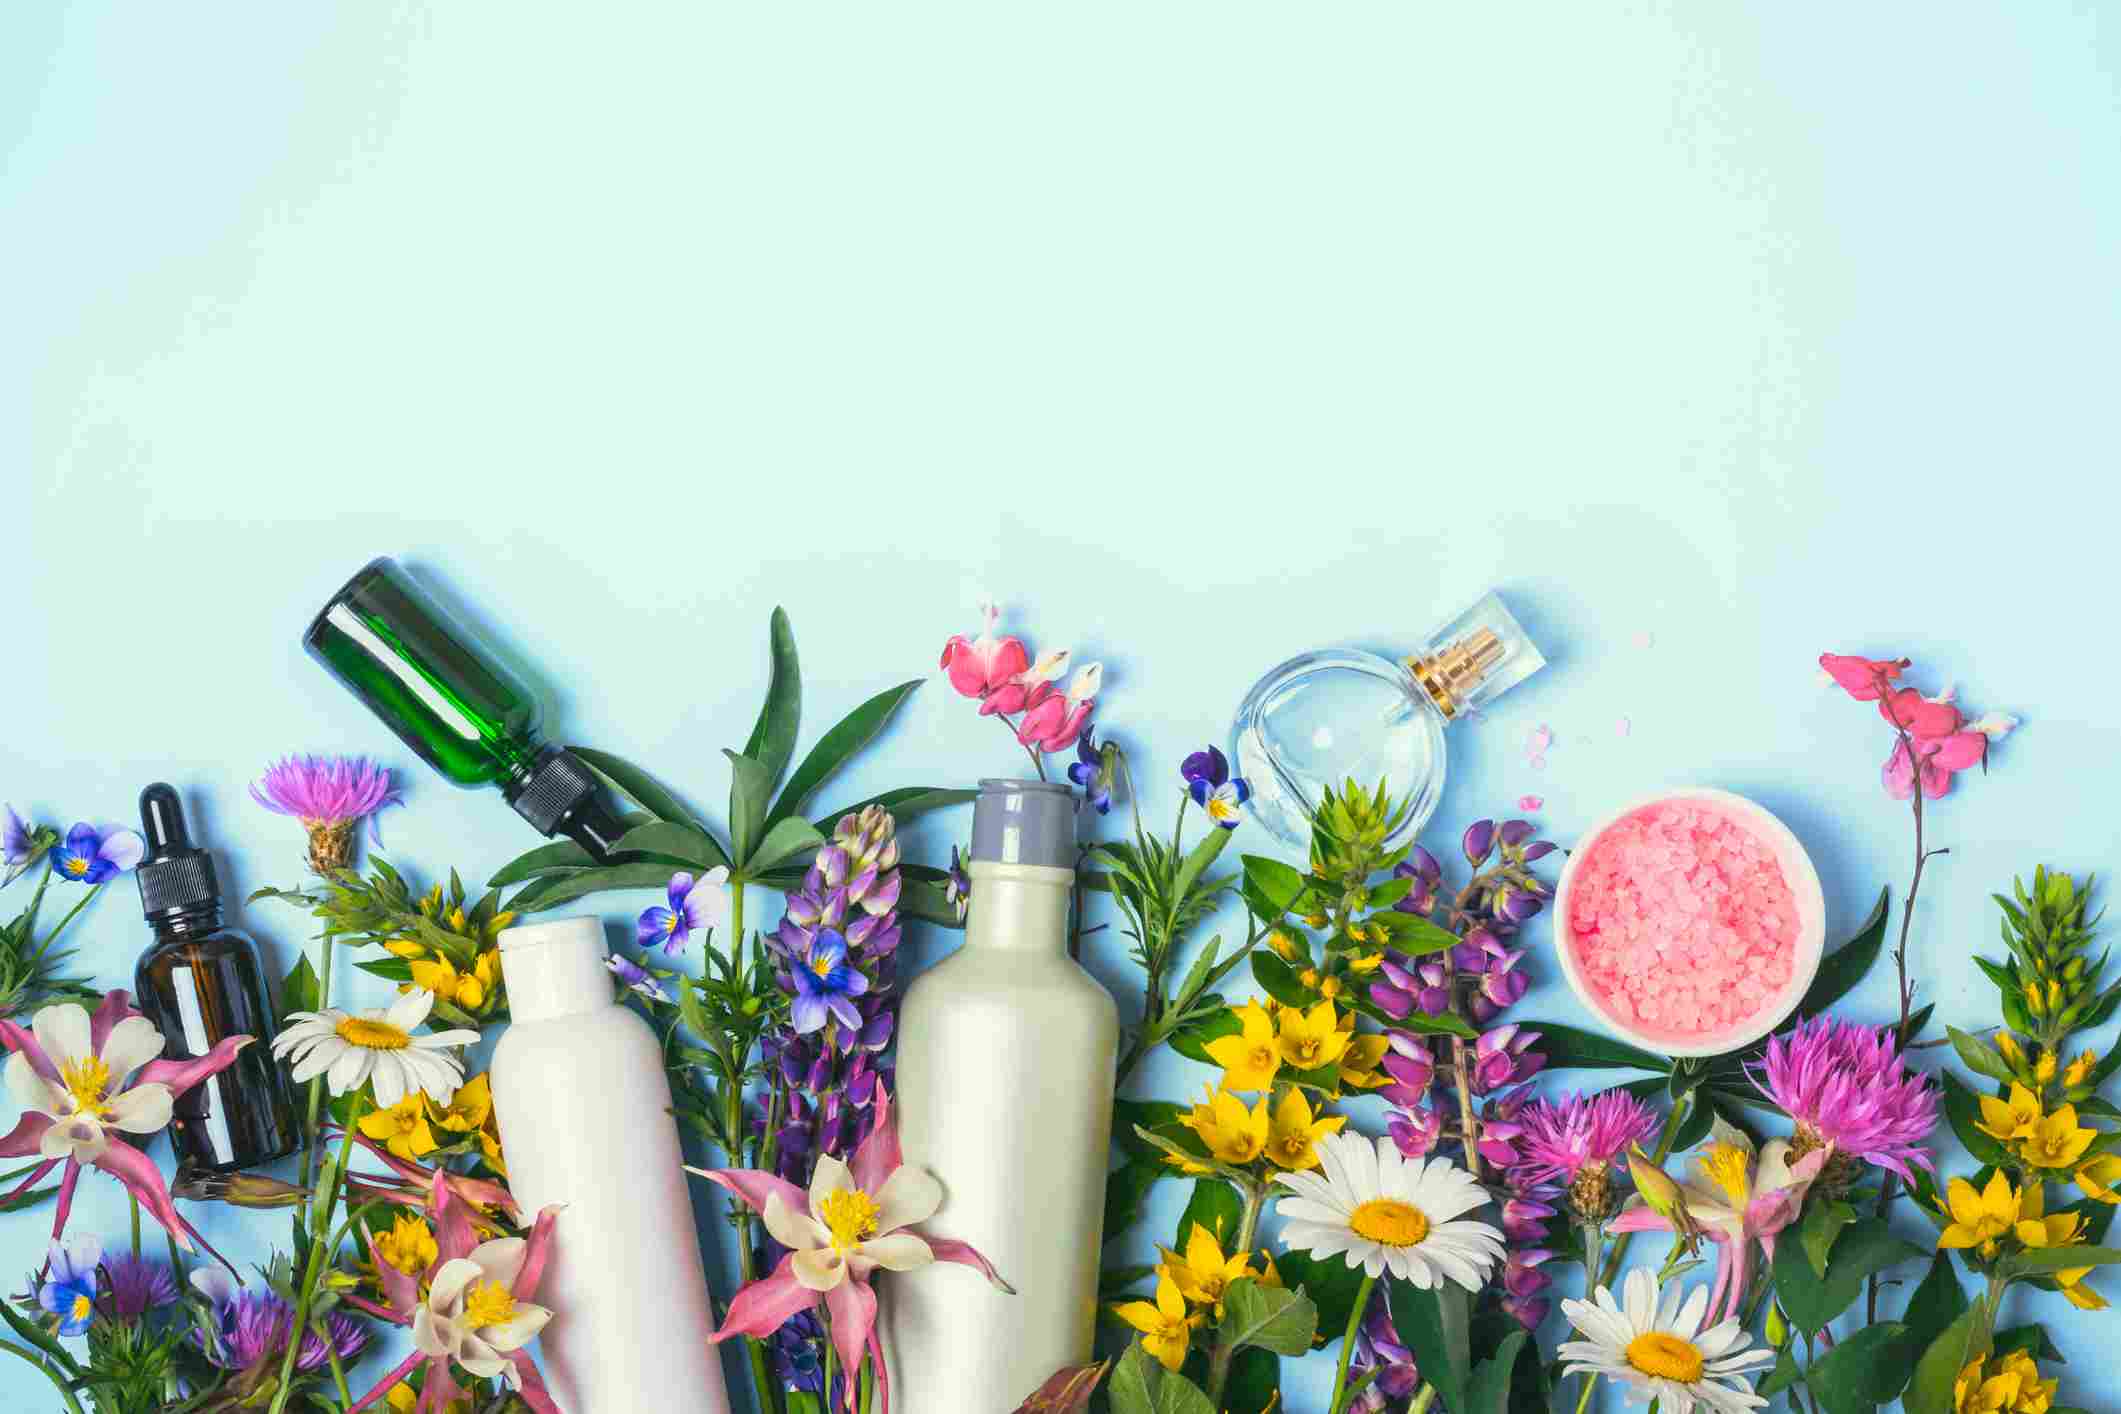 essential oils and natural scent ideas for summer lotions, creams, shampoos and more